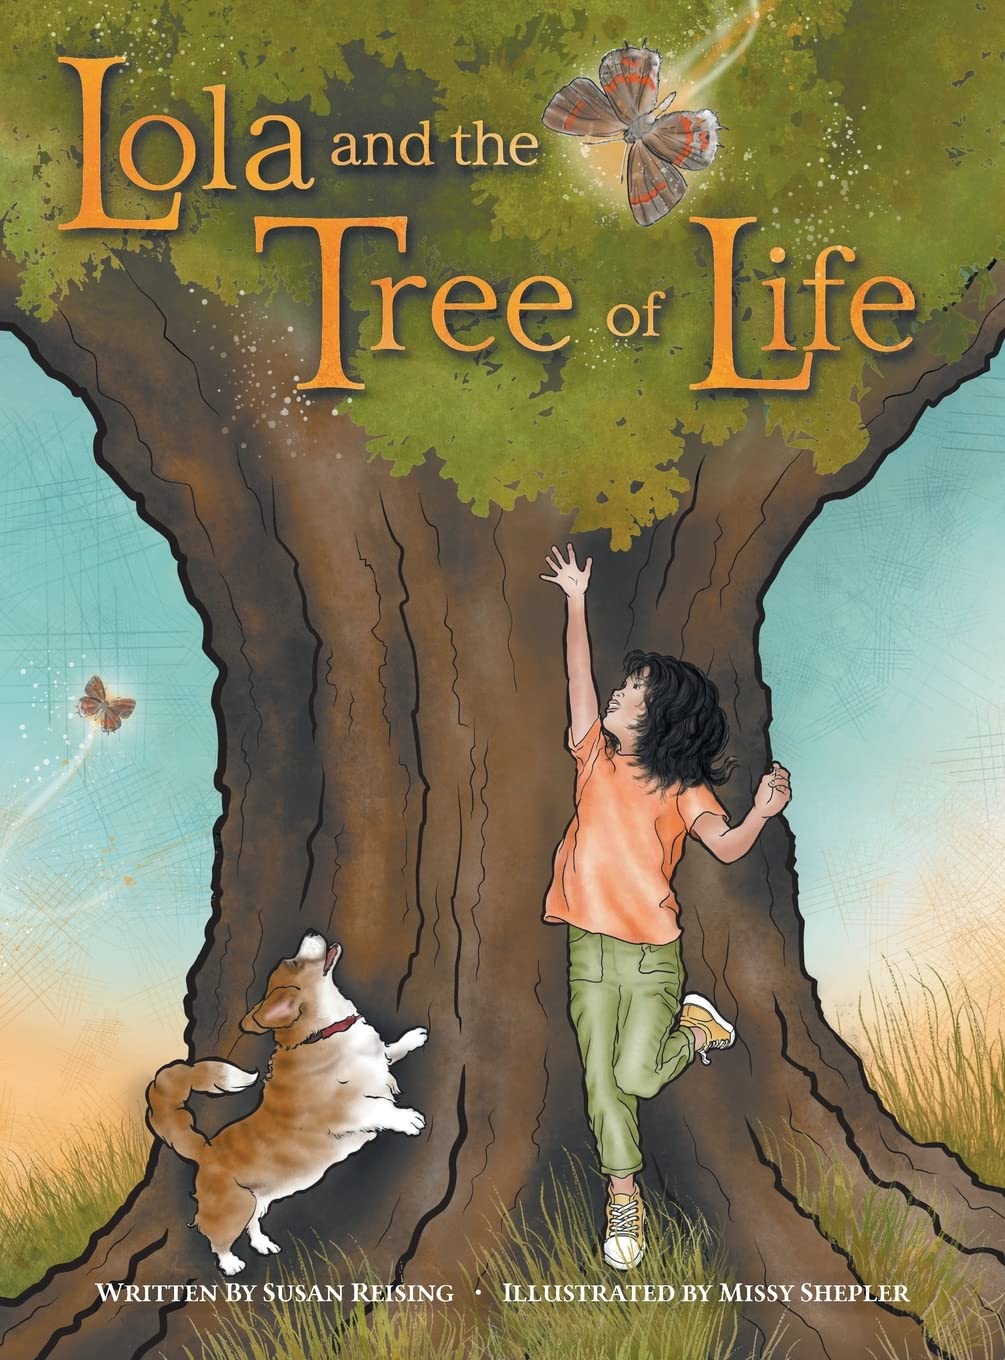 Susan Voigt-Reising ’94. A tale about Lola, her beloved friend Tree (a wise old oak) and her ailing grandfather, crafted to introduce young children to death being a part of life.